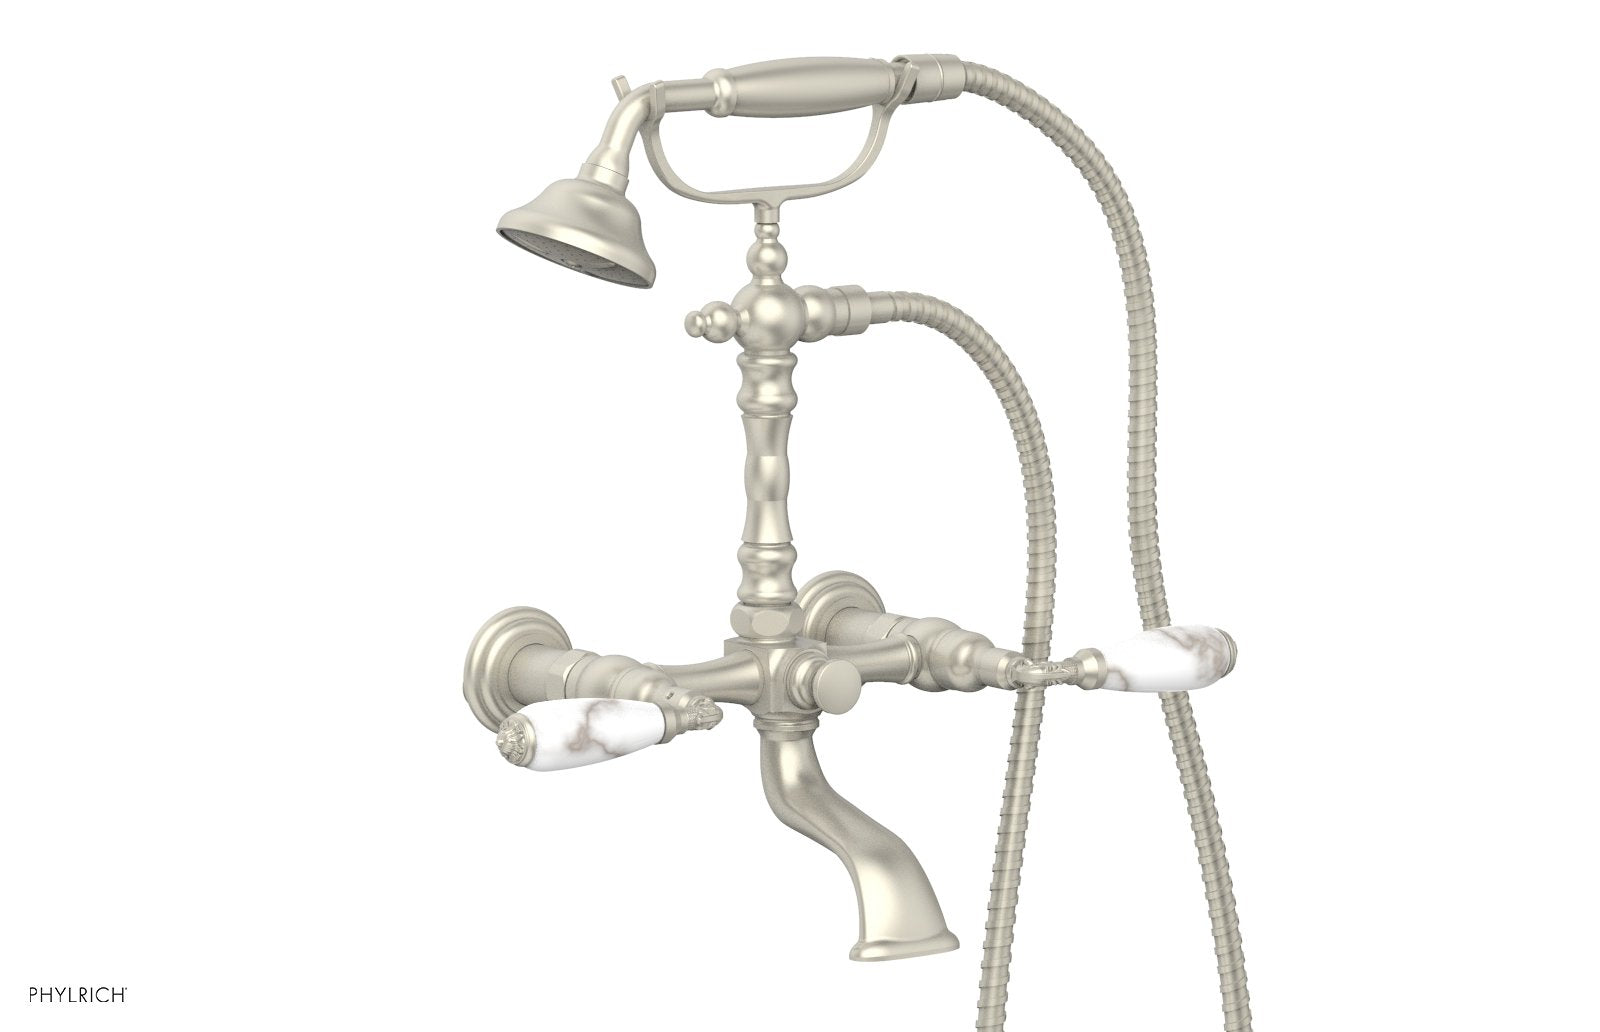 Phylrich VALENCIA Exposed Tub & Hand Shower - White Marble Lever Handle